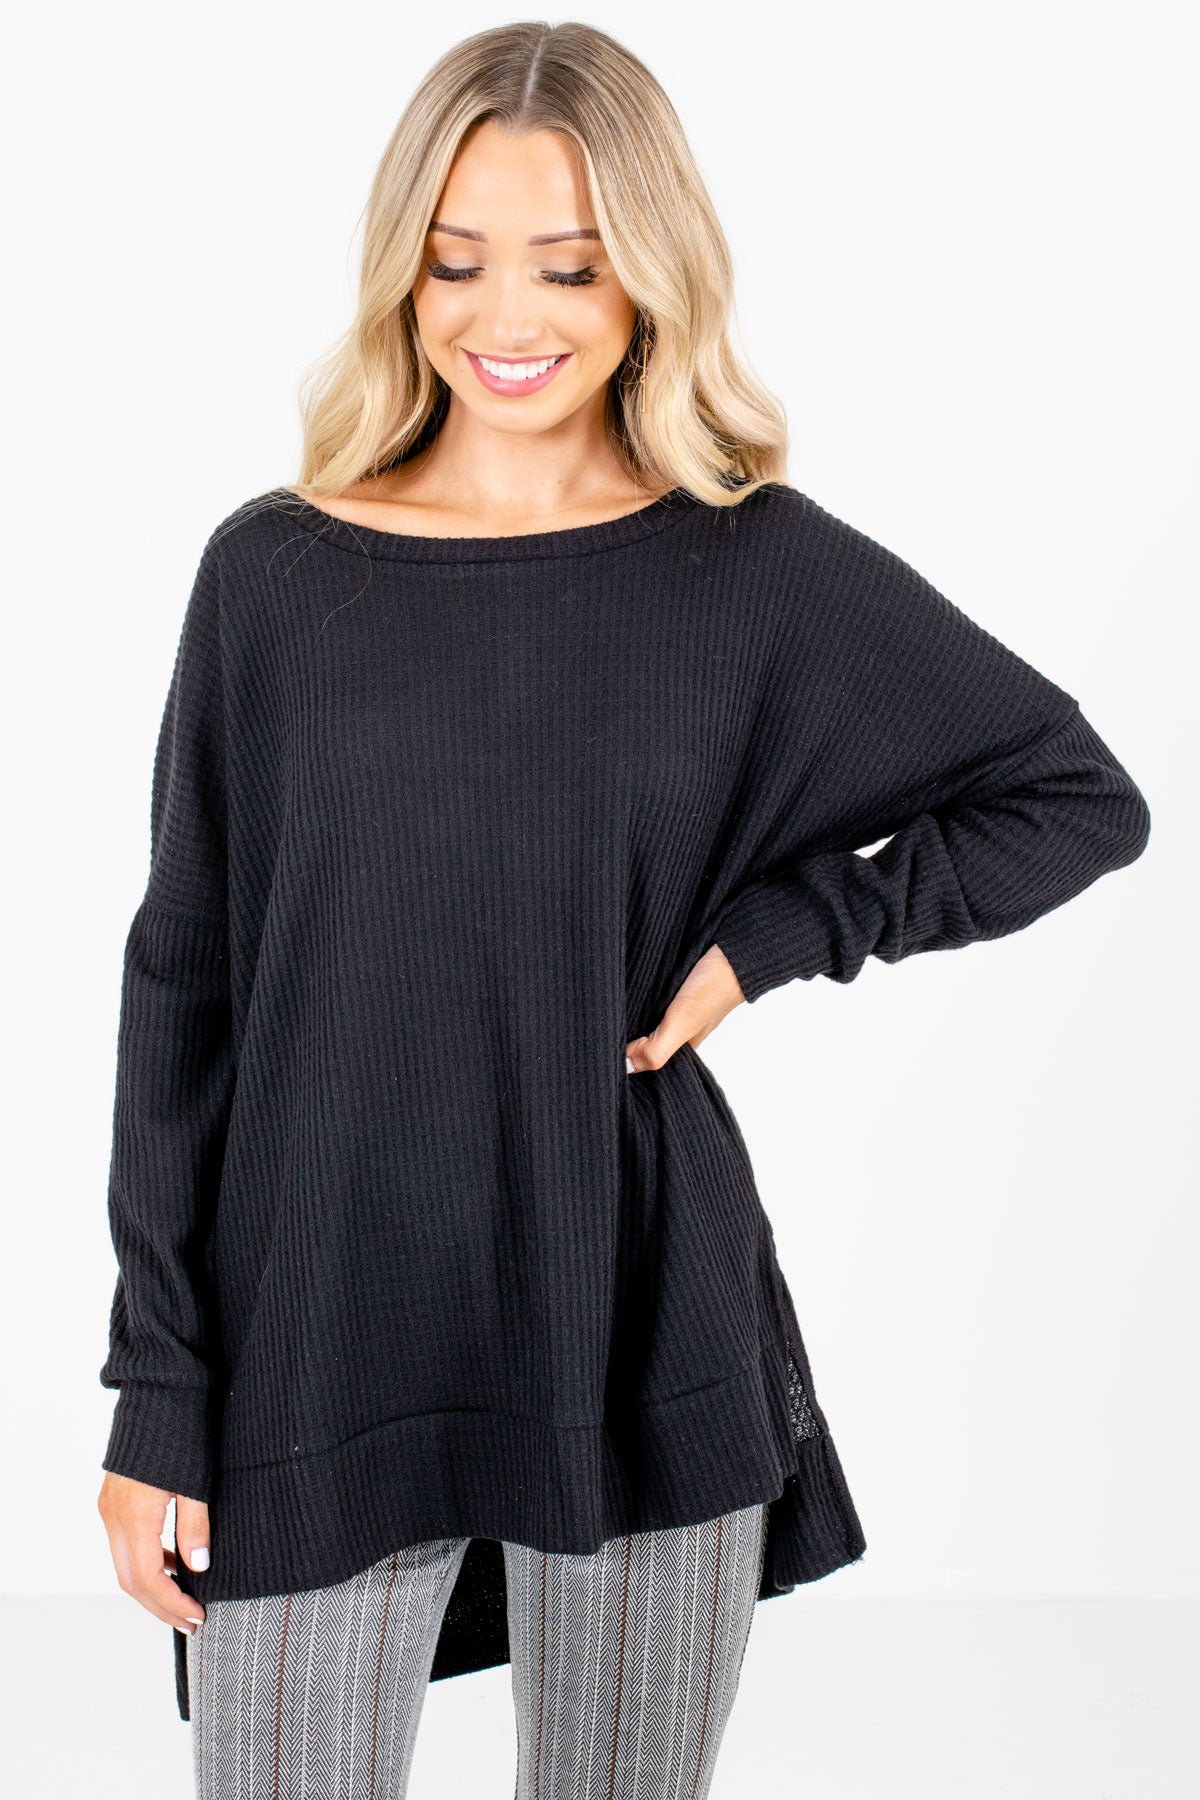 Black High-Quality Waffle Knit Material Boutique Tops for Women